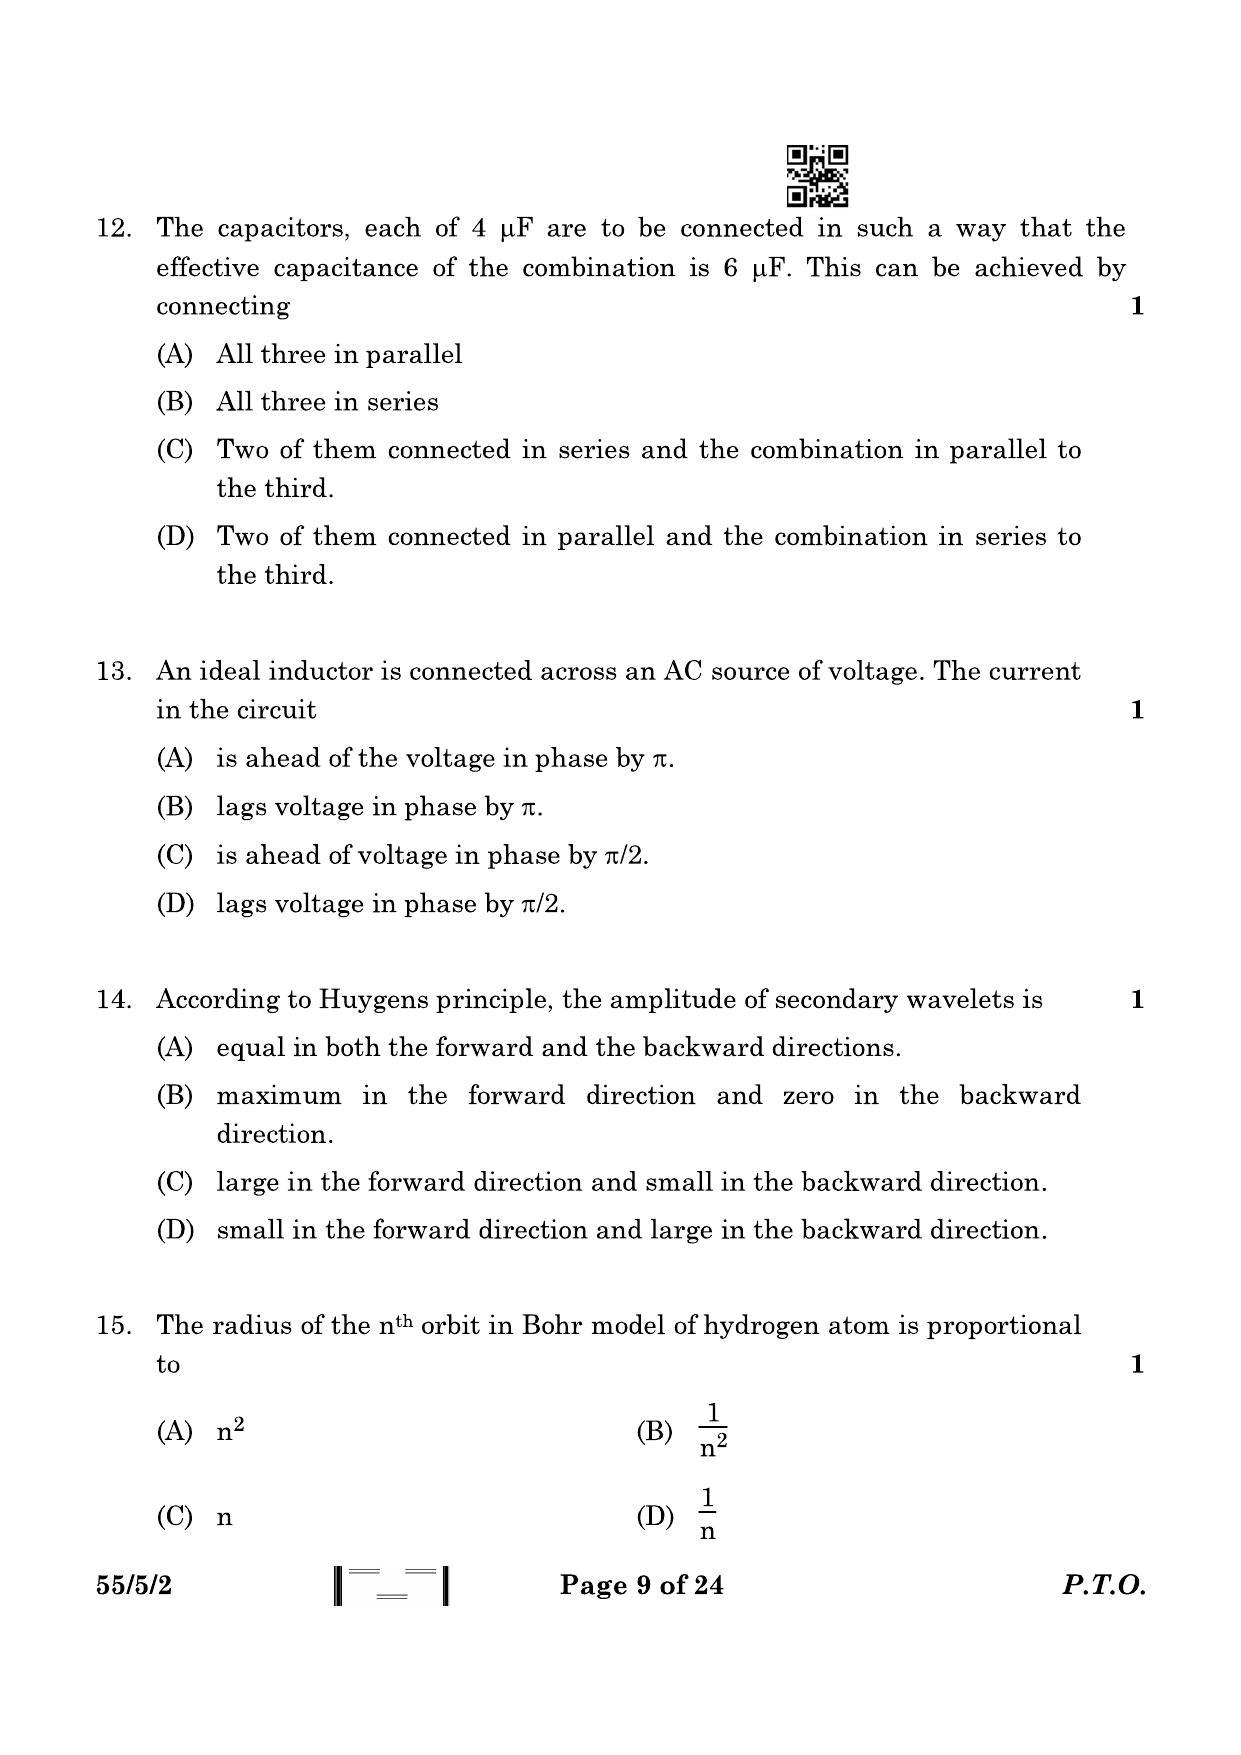 CBSE Class 12 55-5-2 Physics 2023 Question Paper - Page 9